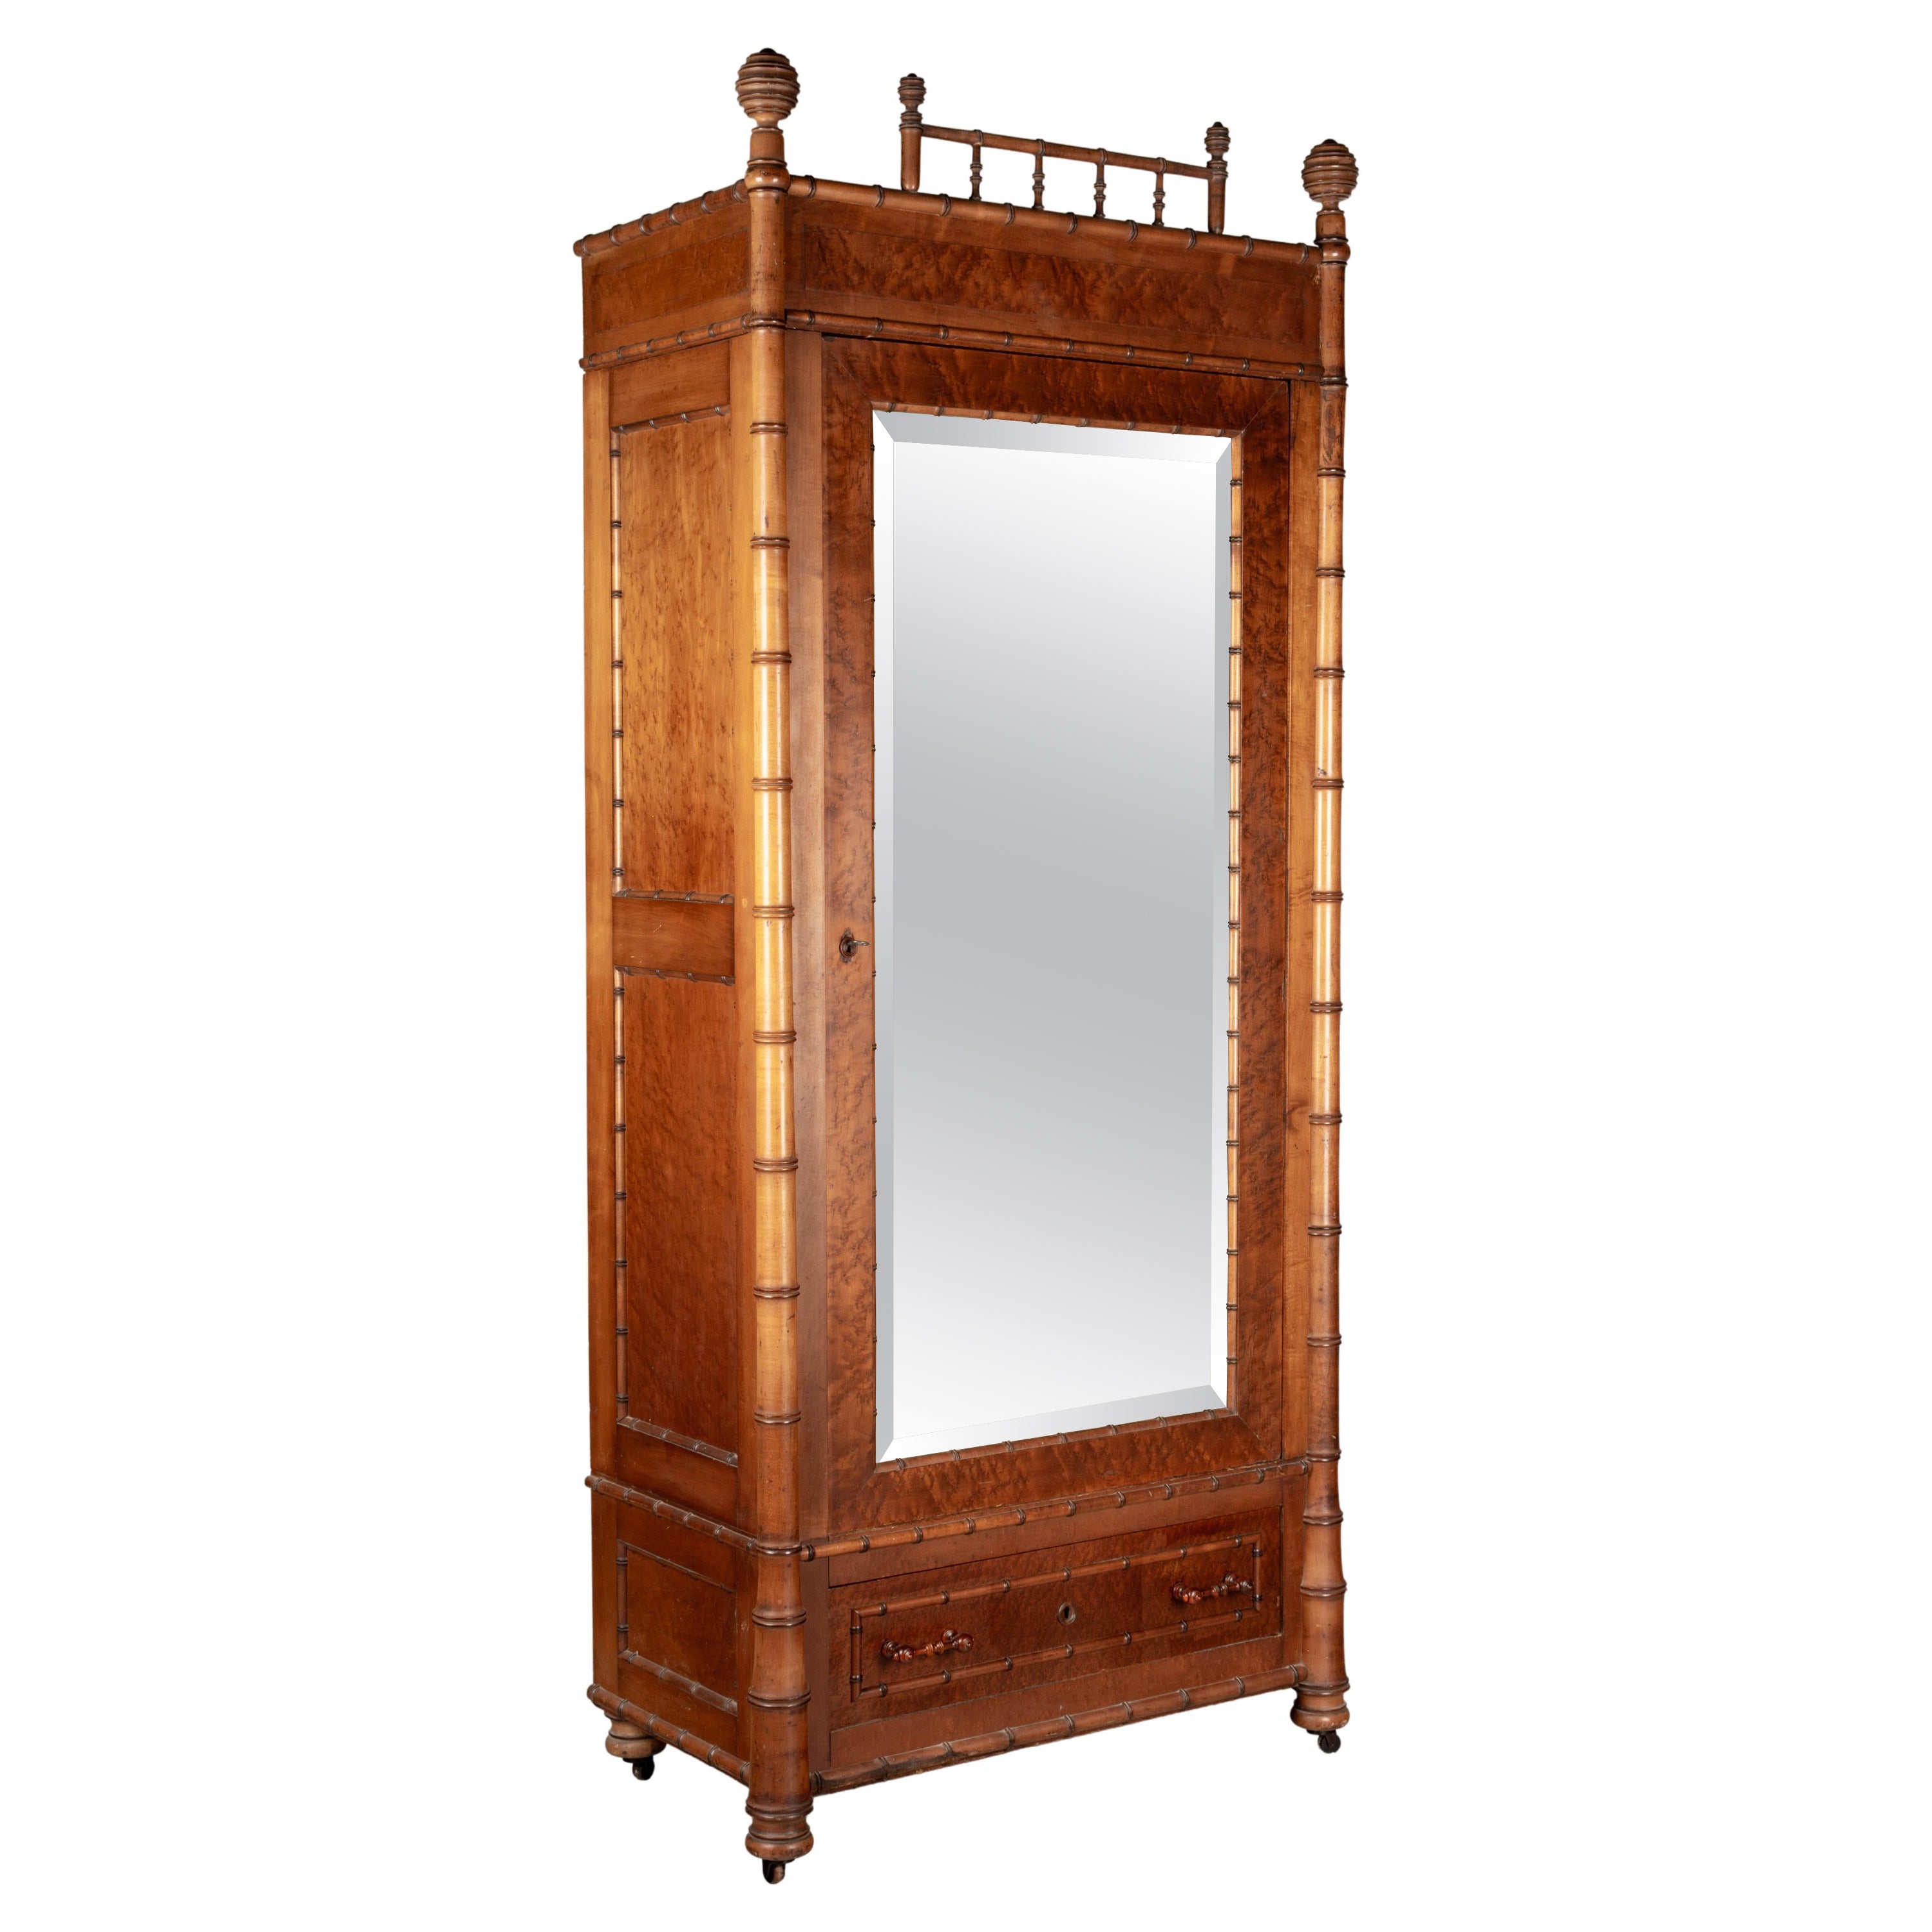 R.J. Horner Aesthetic Movement Faux Bamboo Armoire and Nightstand